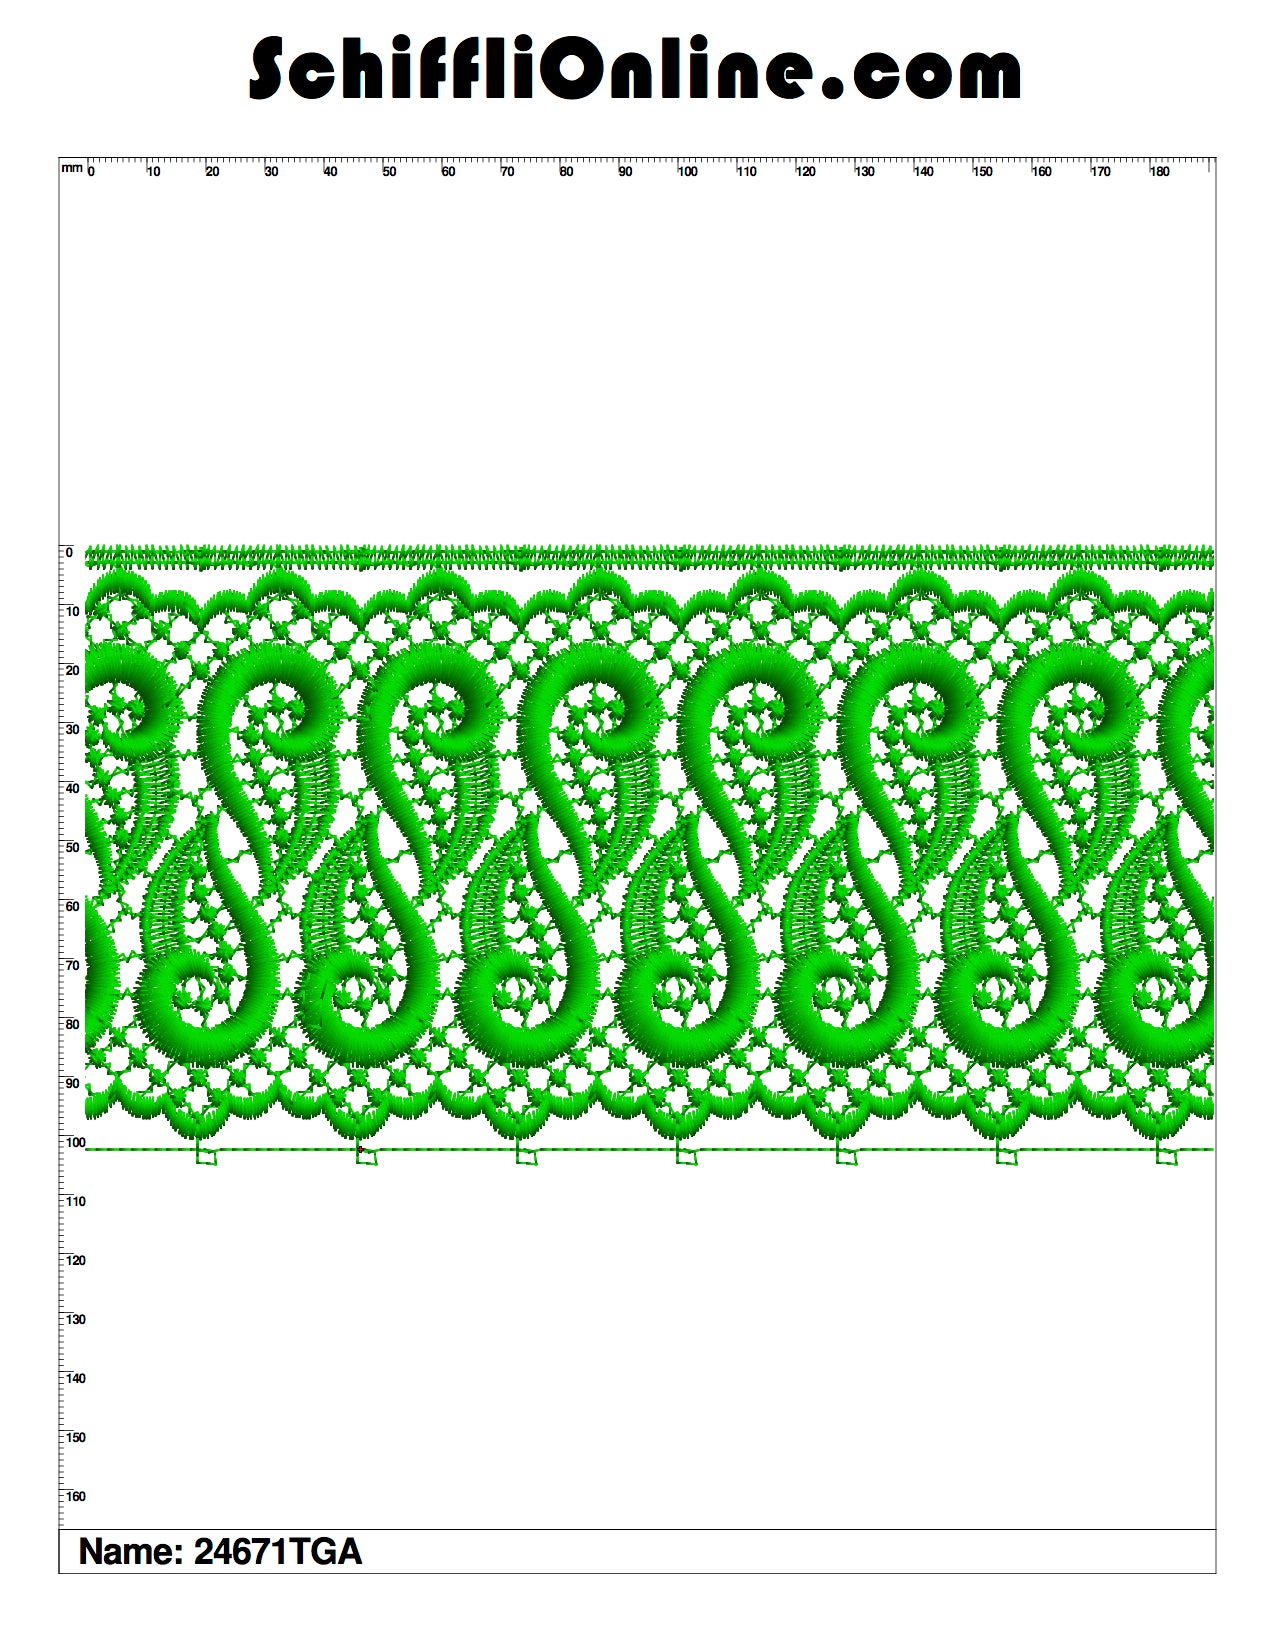 Book 120 CHEMICAL LACE 4X4 50 DESIGNS